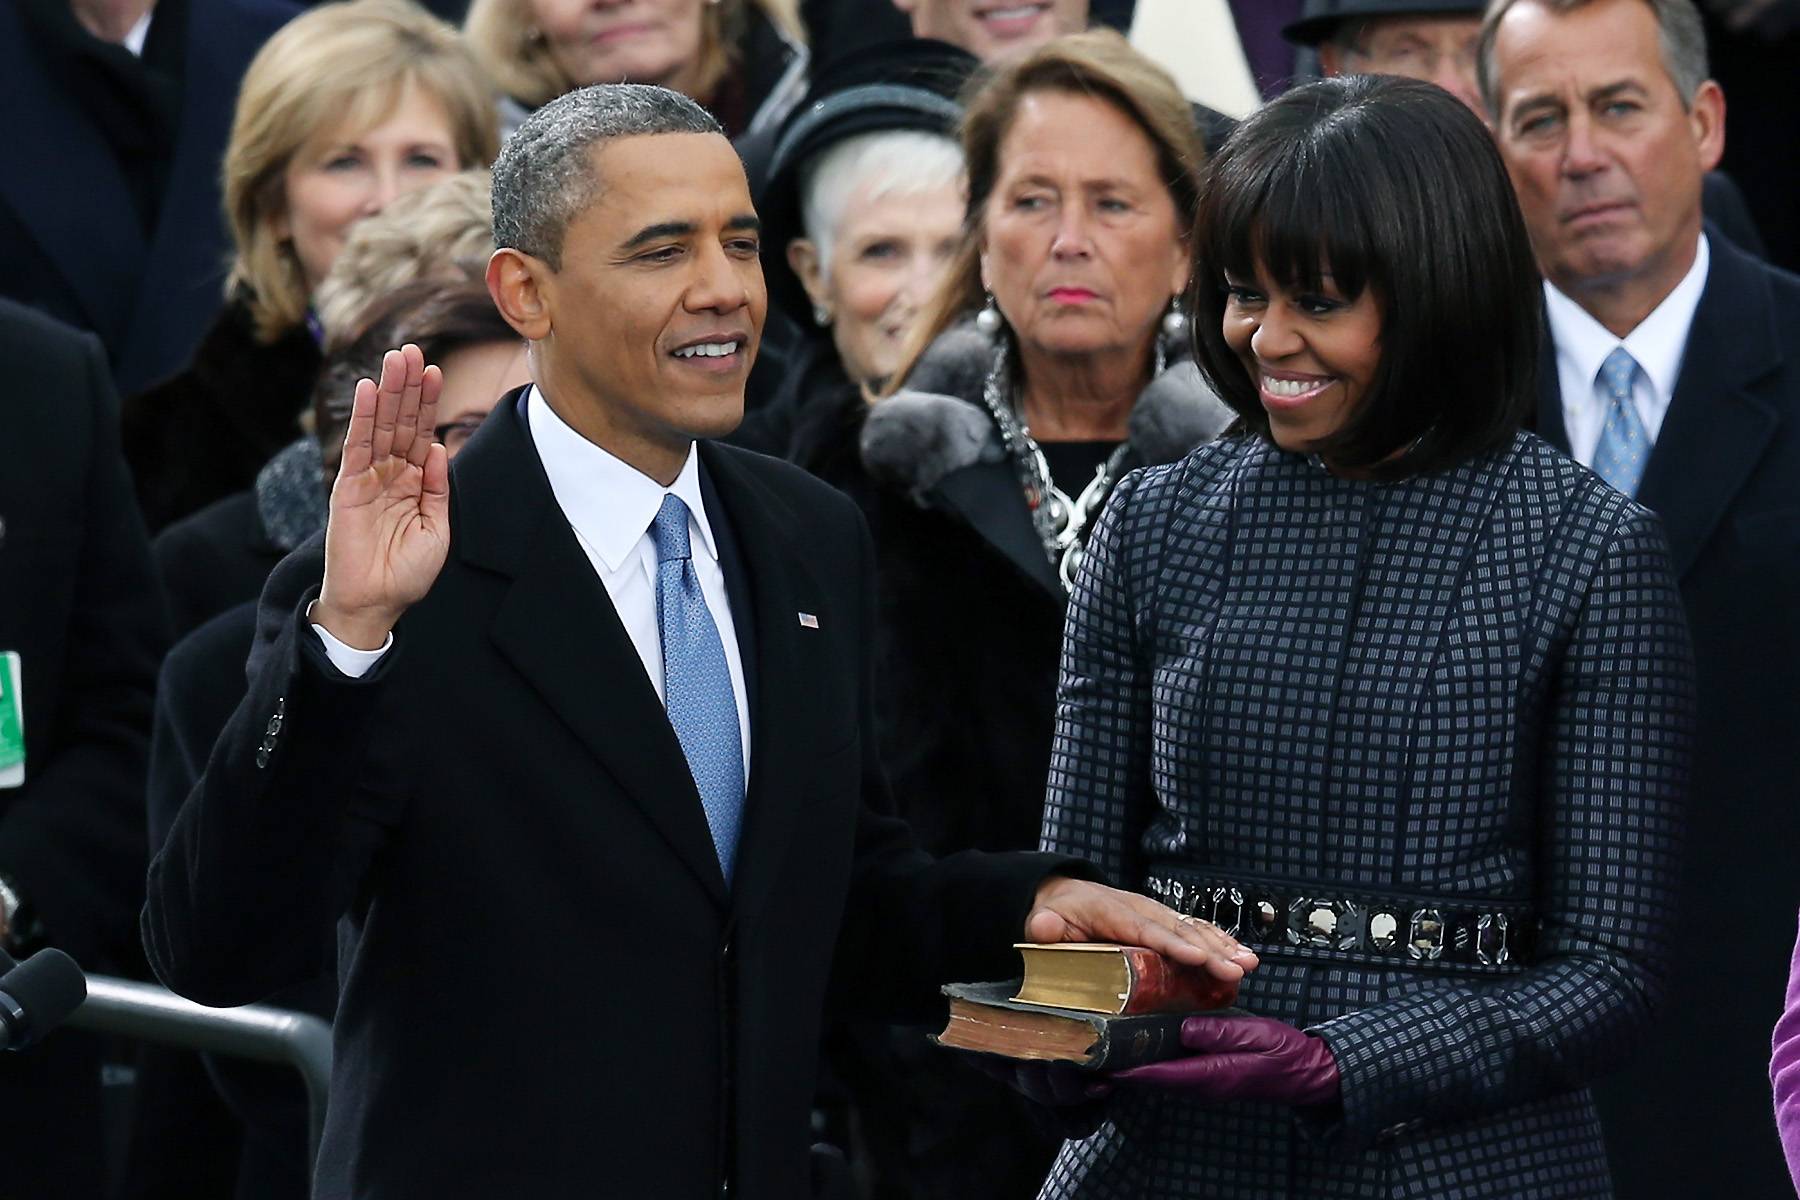 Obama Inaugurated for Second Term